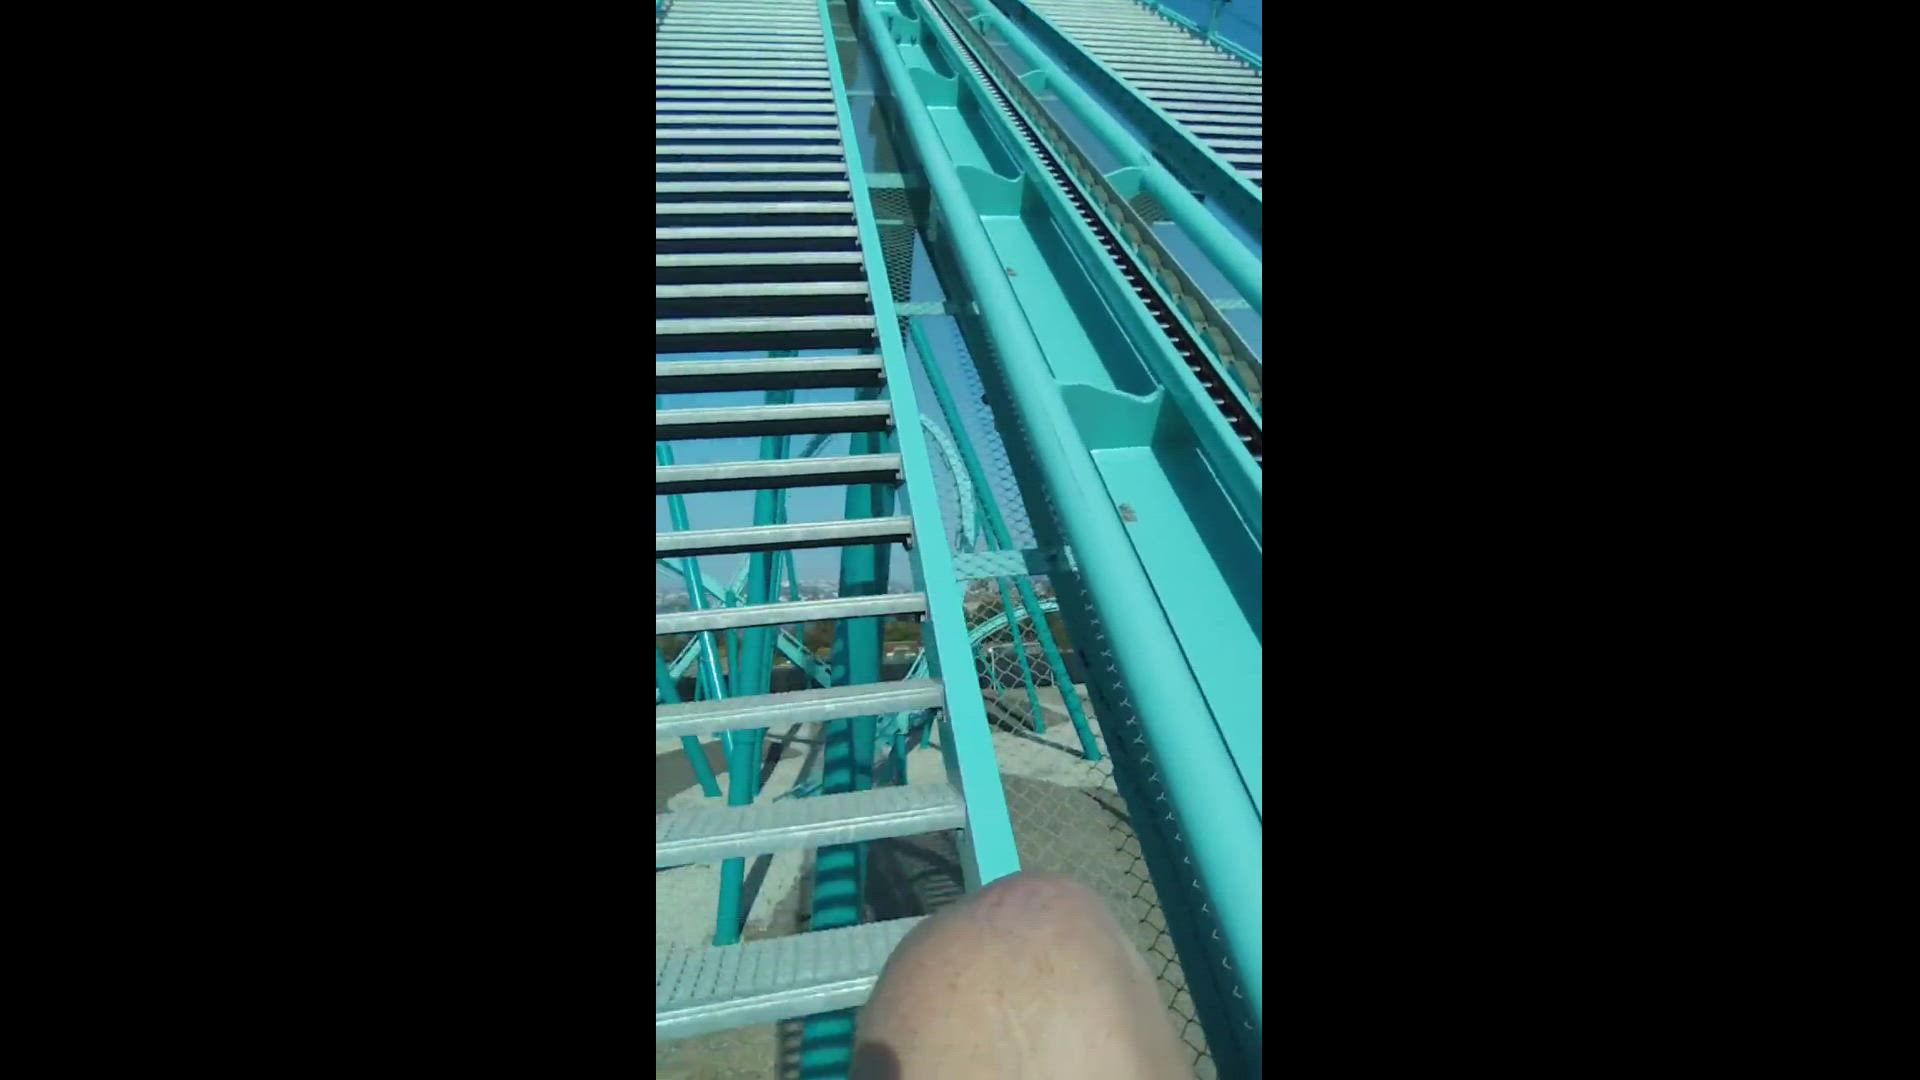 Taken a couple of days ago at SeaWorld, I've ridden 222 times as of today!
Credit: Scott O'Grady